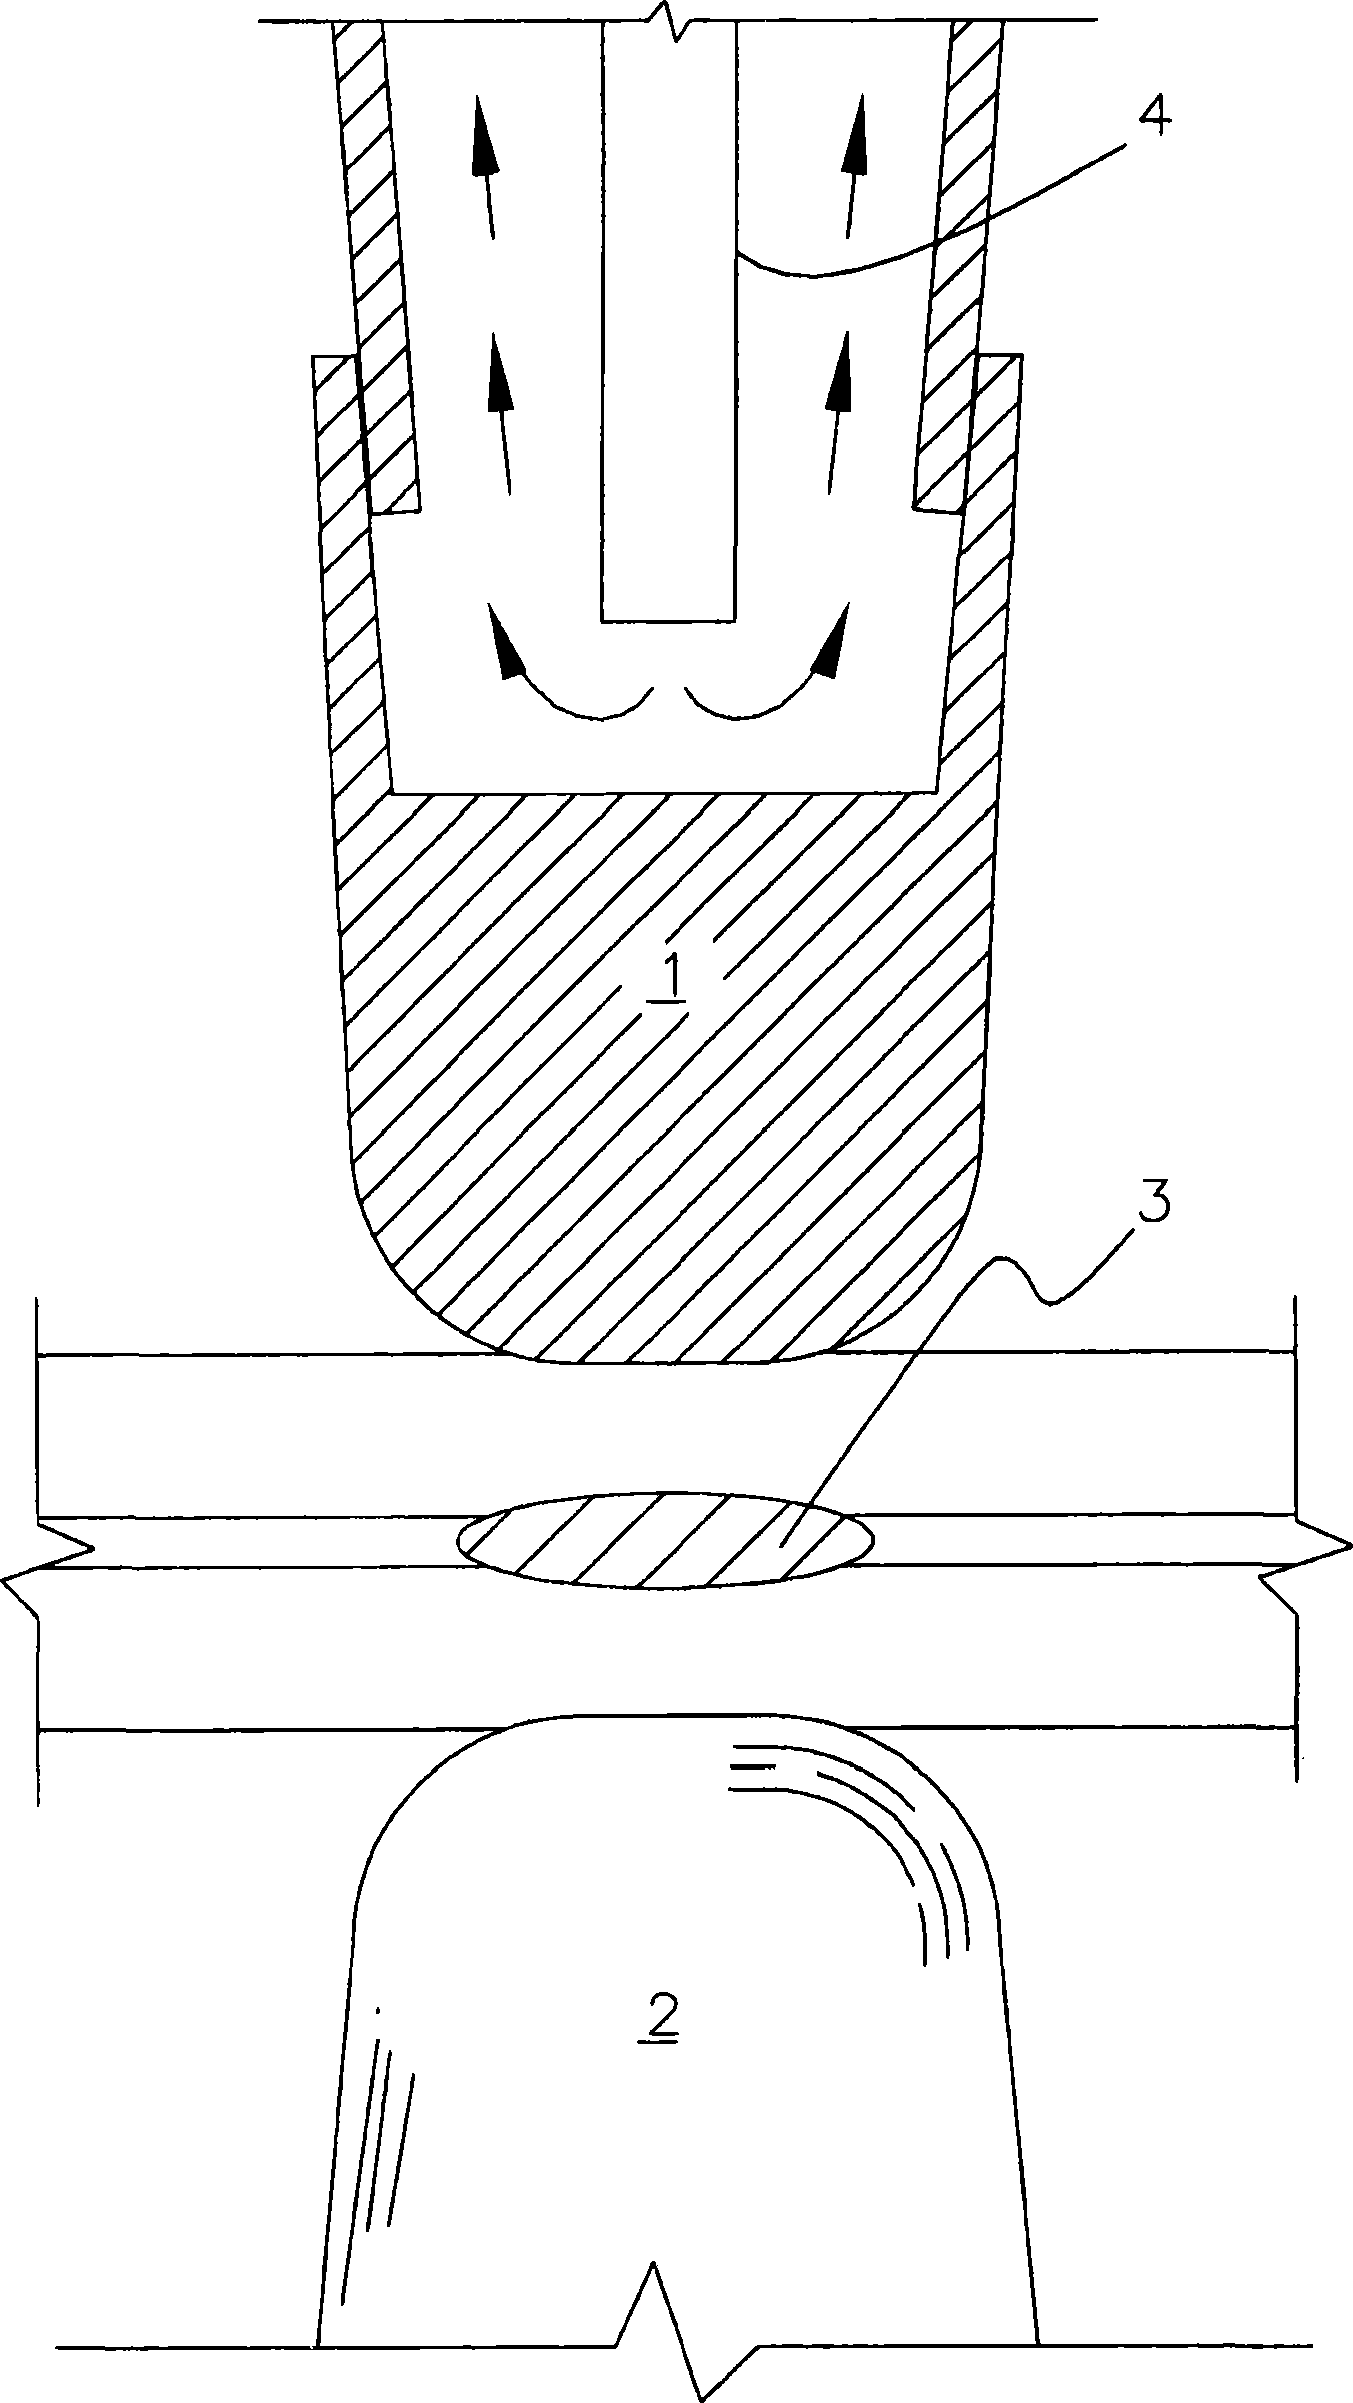 System for and method of edge welding using projections